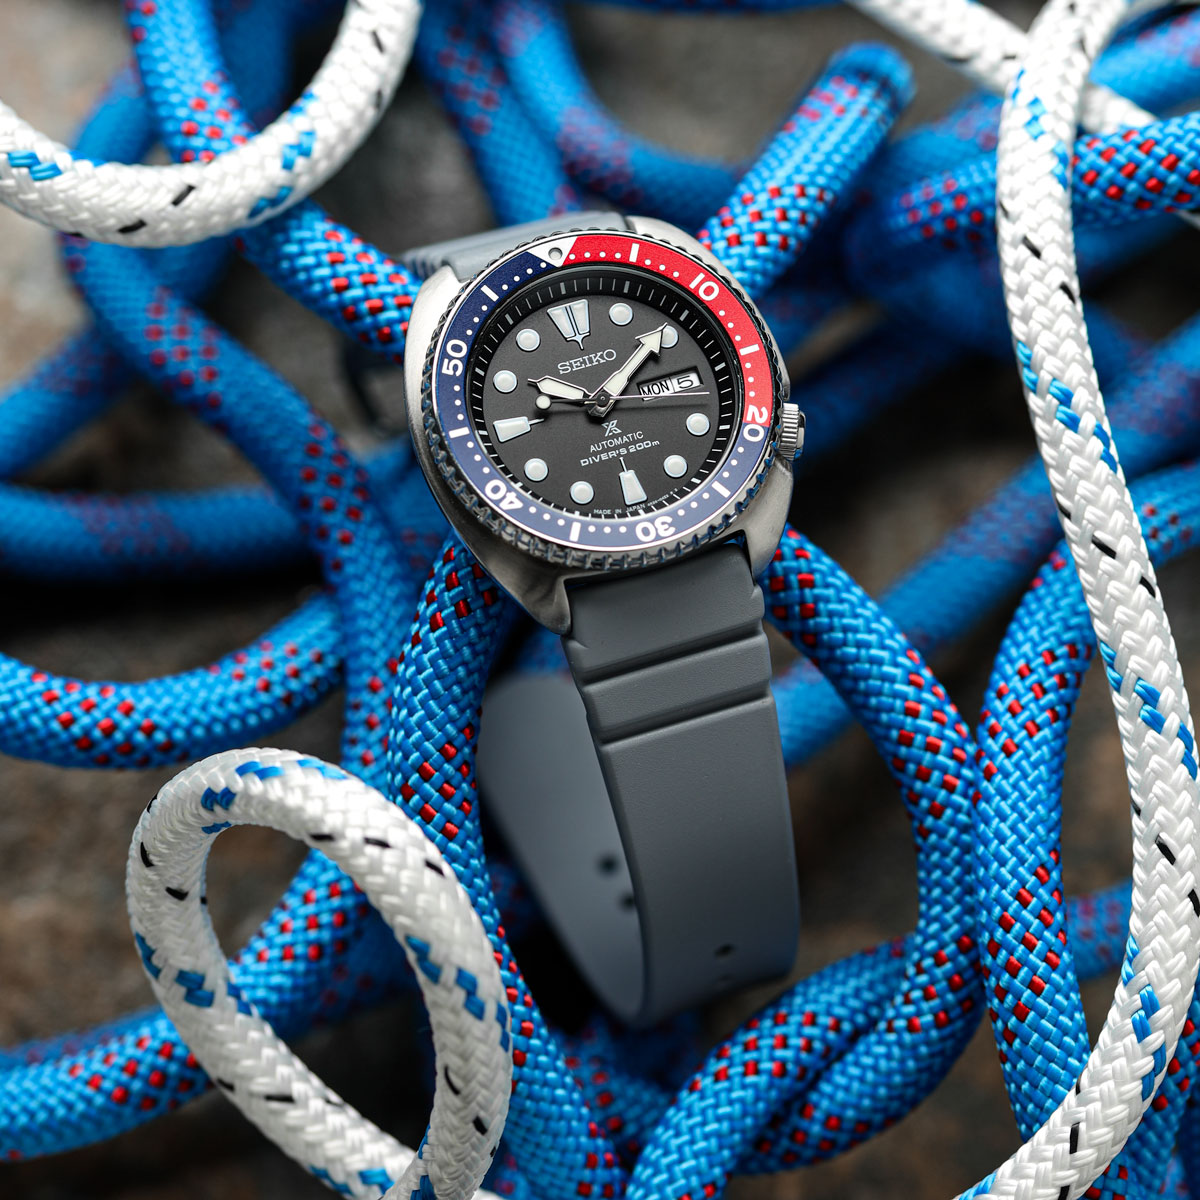 ZULUDIVER 284 Italian Rubber Dive Watch Strap - Camouflage Grey - additional image 2